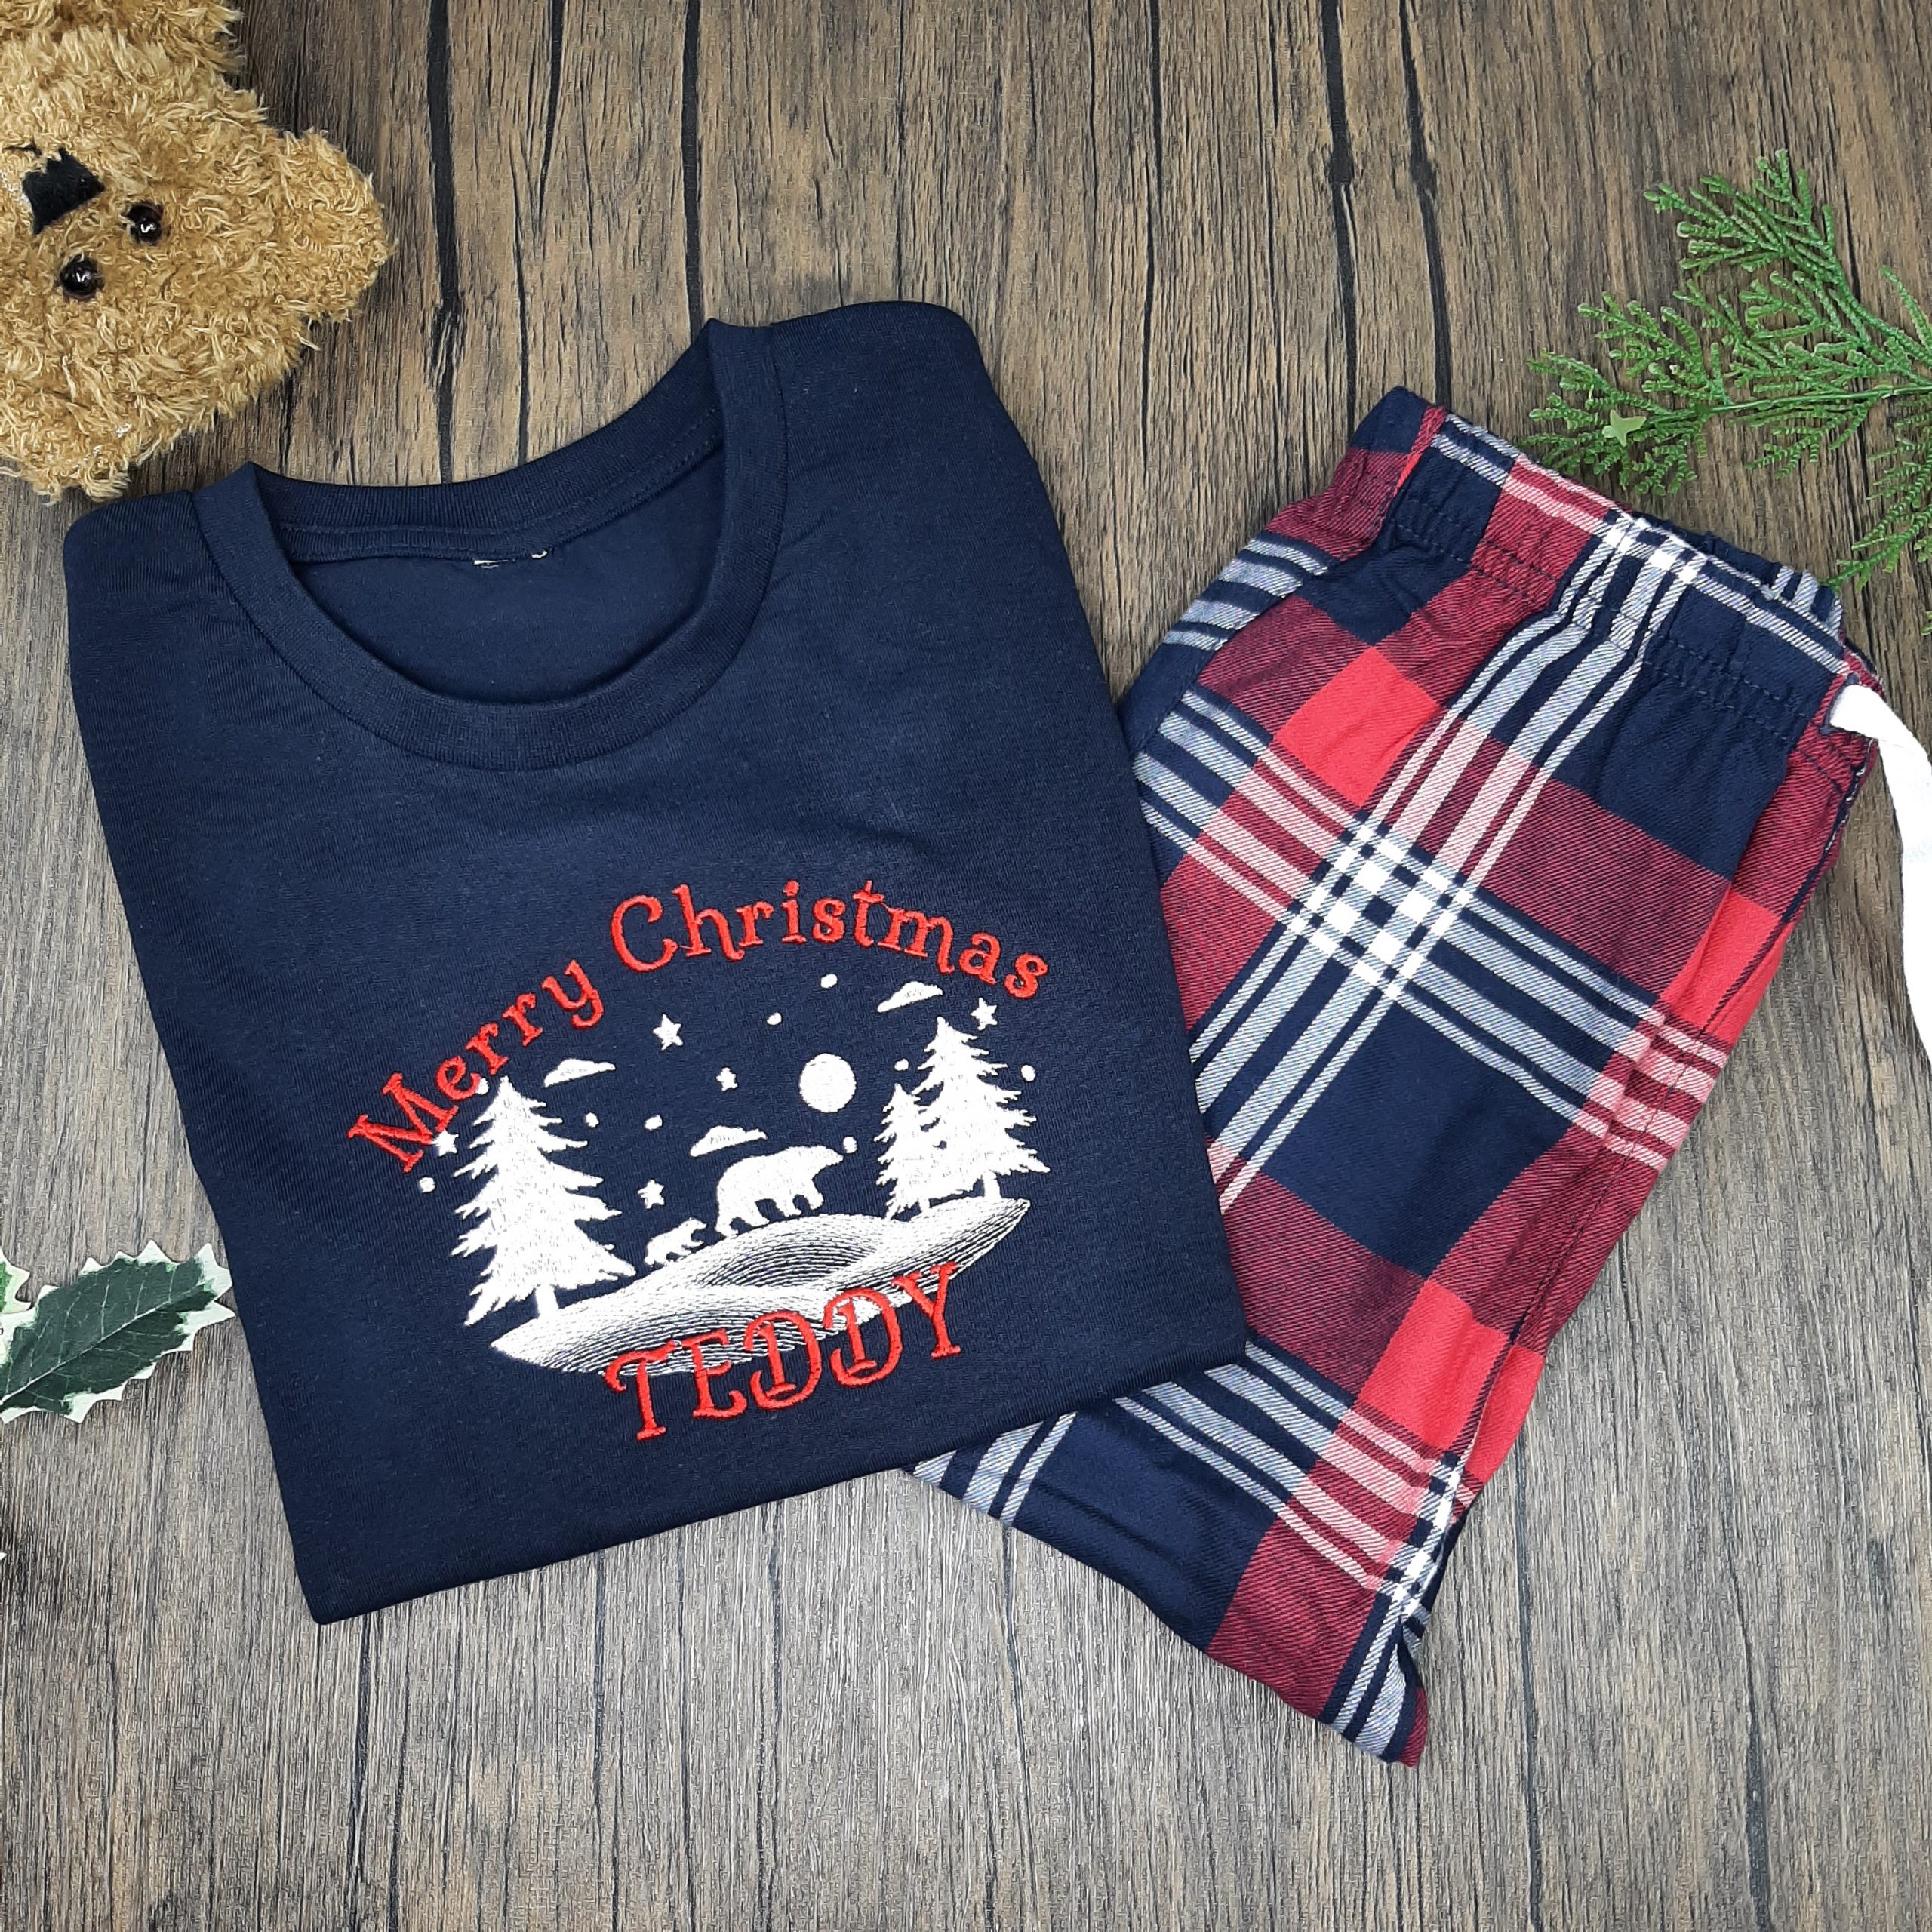 Family Tartan Winter PJs, children's tarten winter pjs are great pyjamas for christmas. Featuring polar bear snow scene. All embroidered personalisation. Red name. Laid with teddy